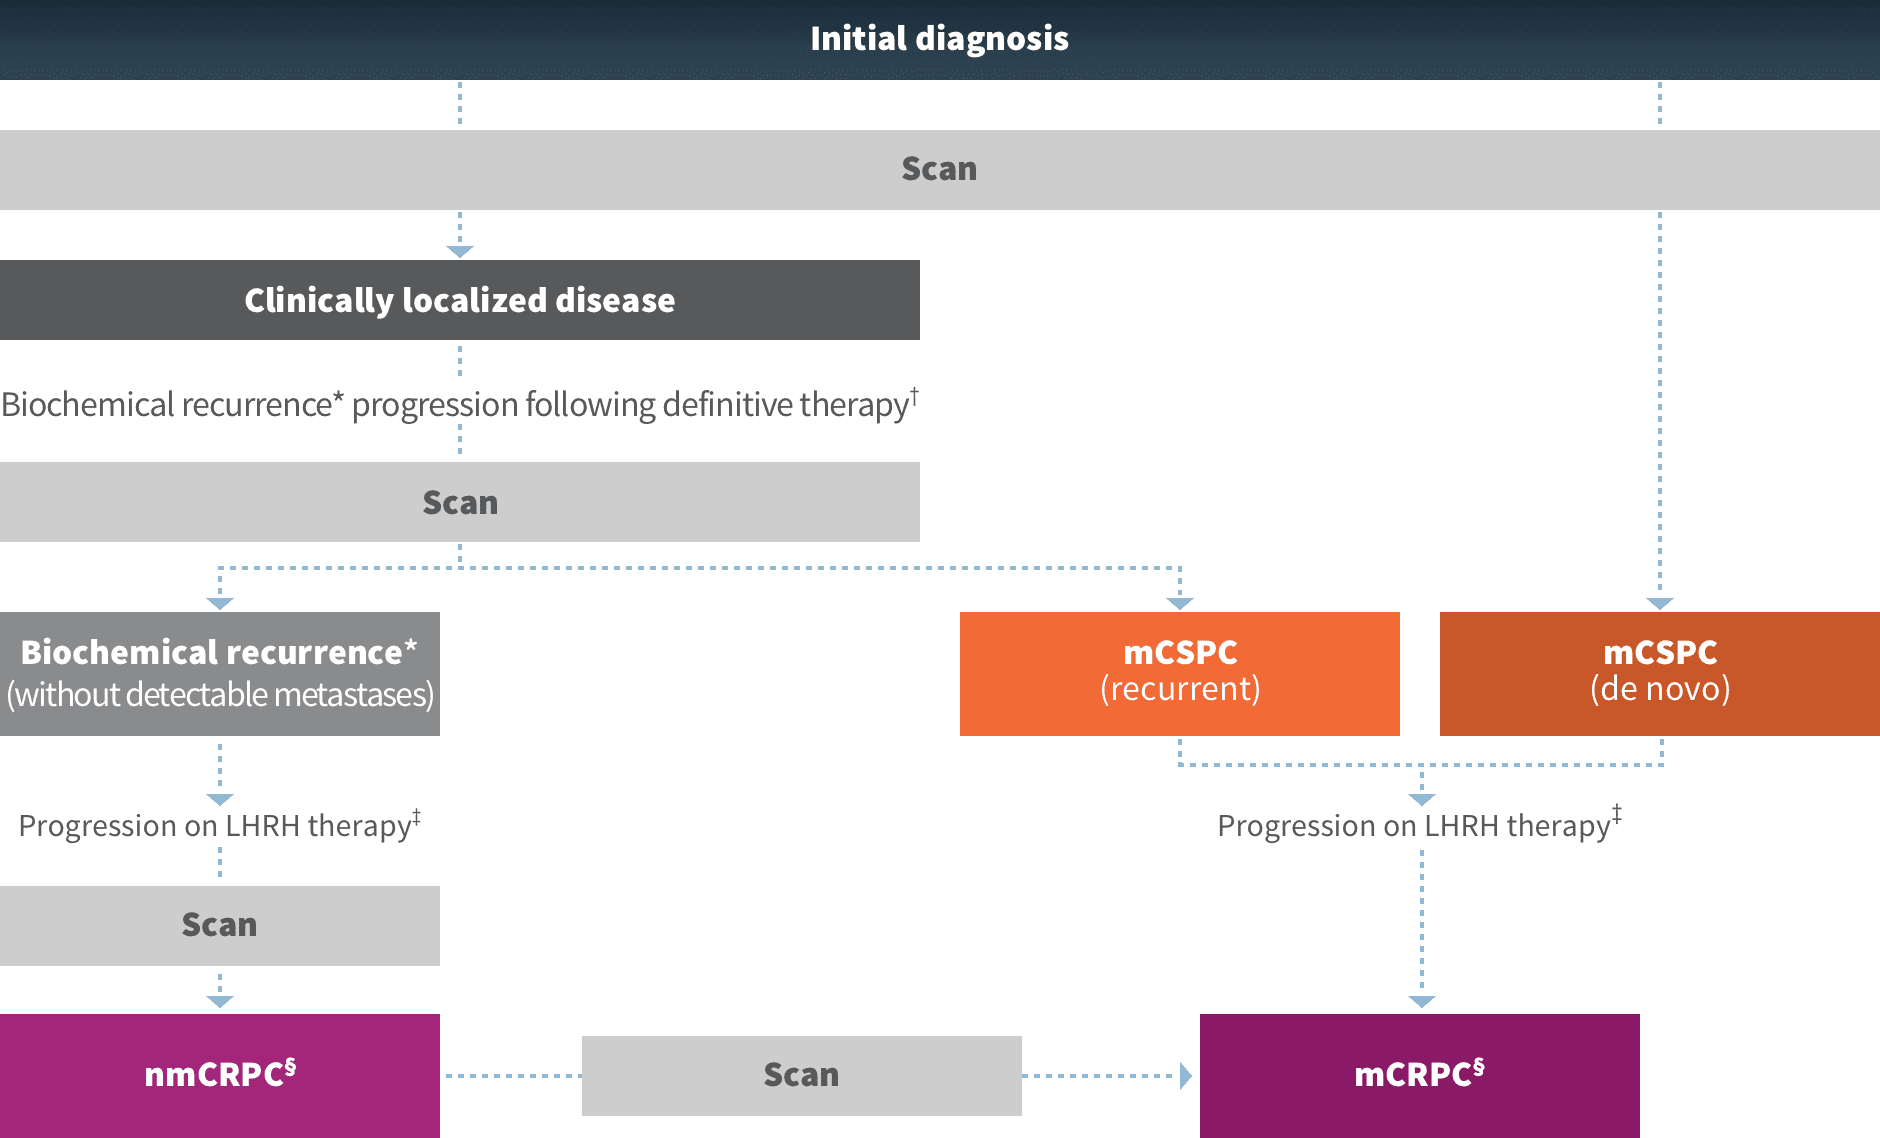 Pathways to advanced prostate cancer diagnoses